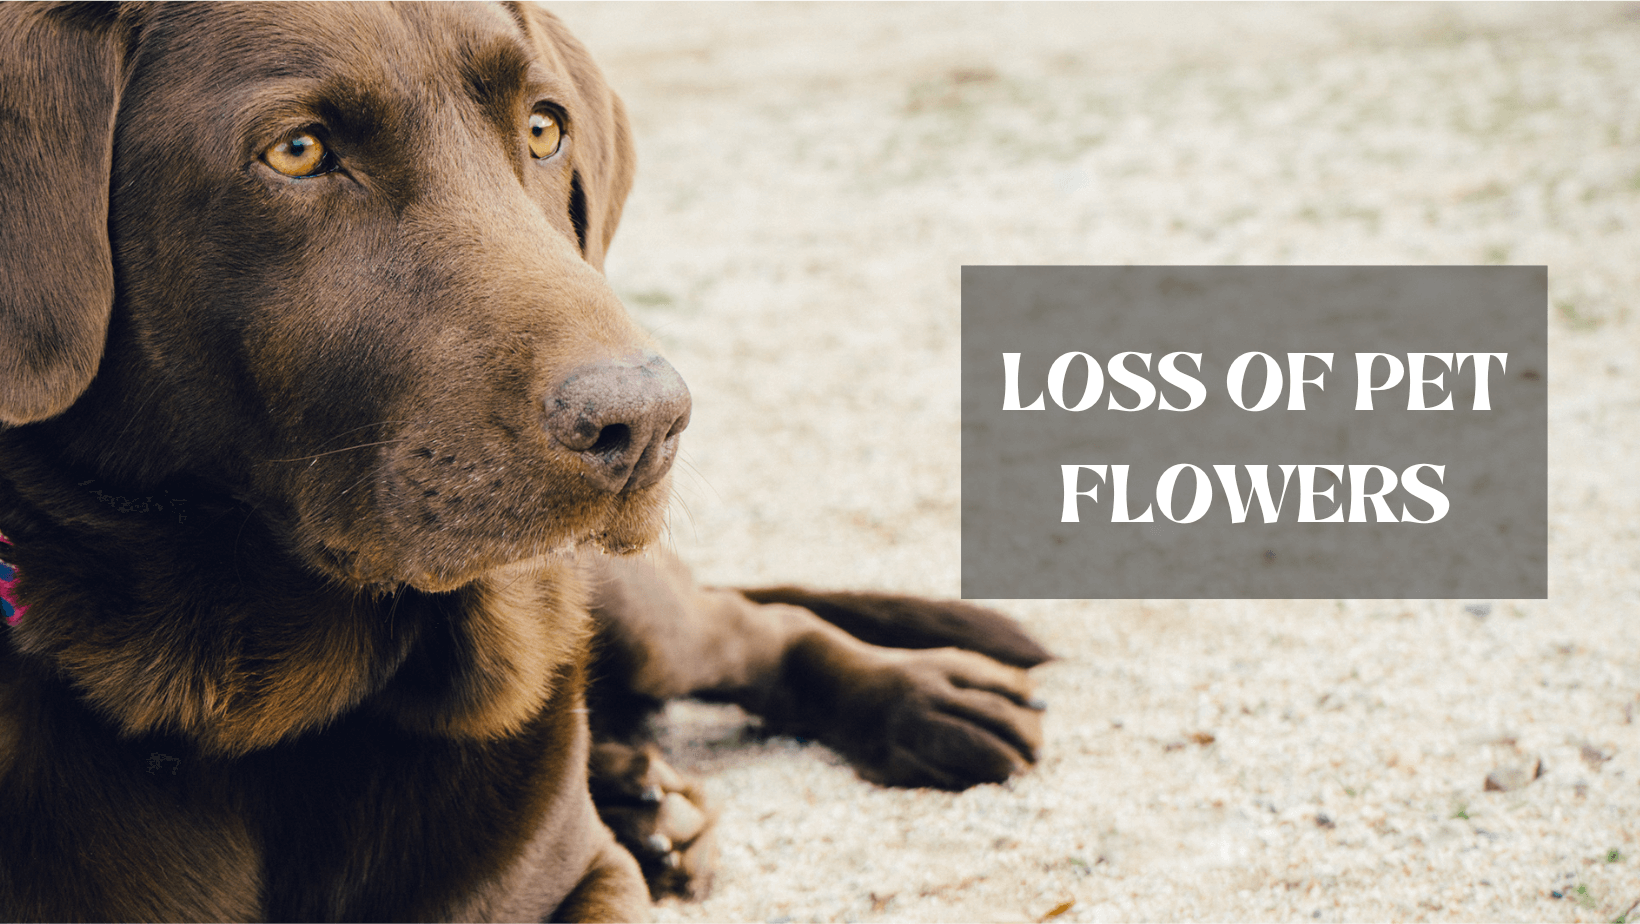 Types Of Sympathy Flowers For The Loss Of A Pet | Hockessin Florist ...